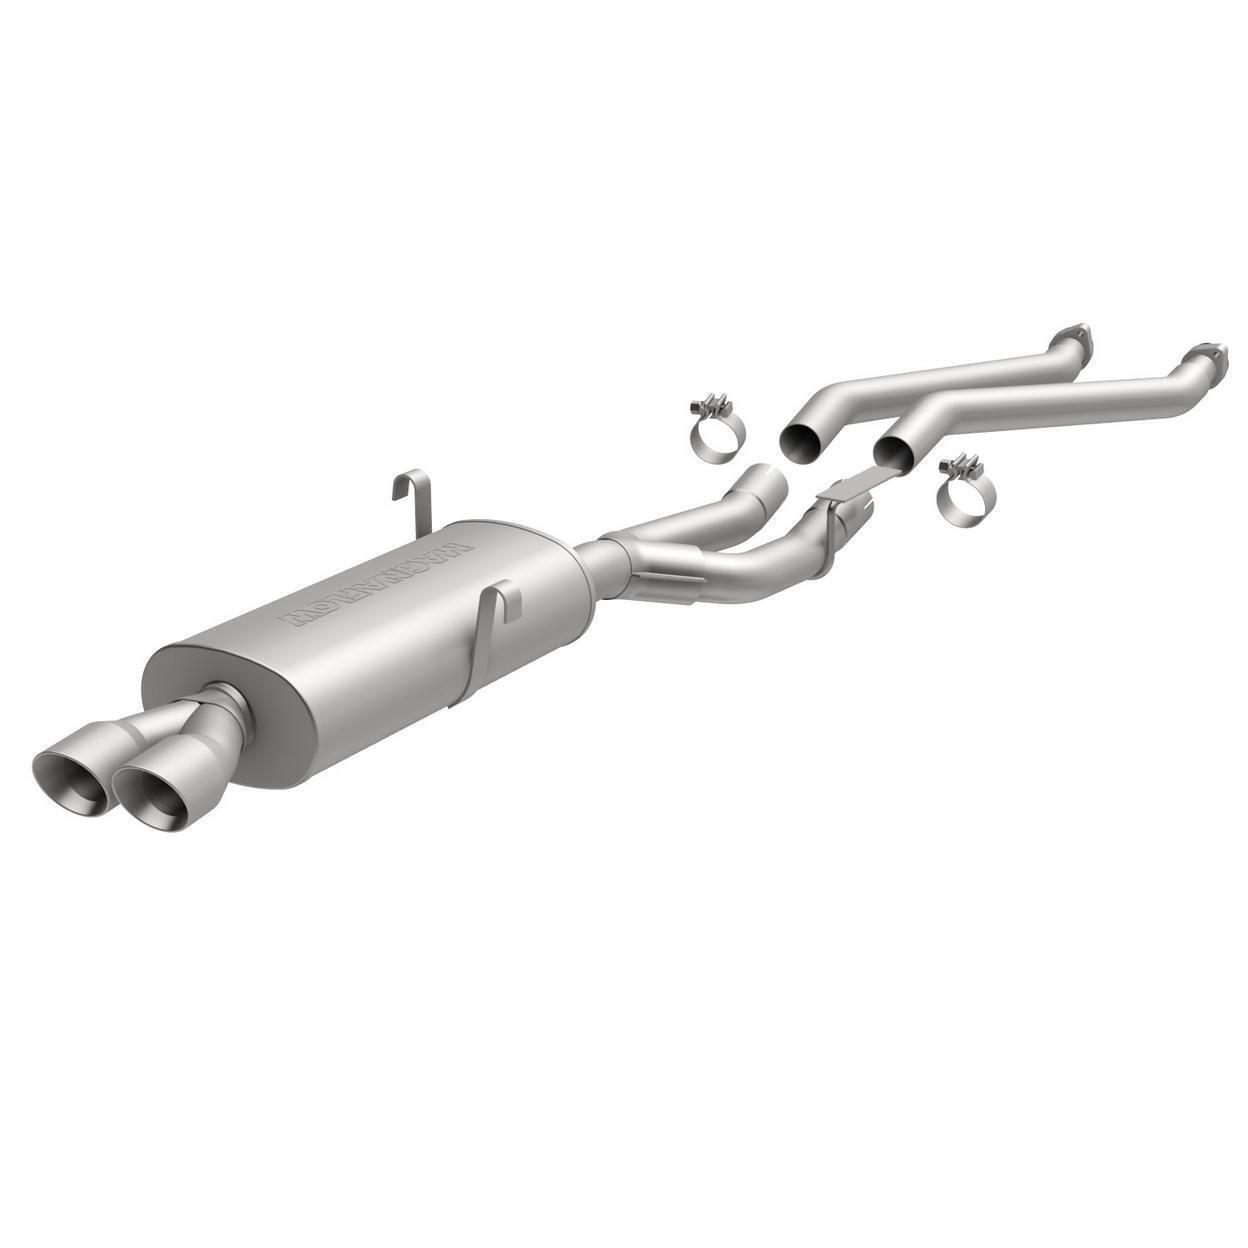 Magnaflow Exhaust System Kit for 1987-1990 BMW 325is